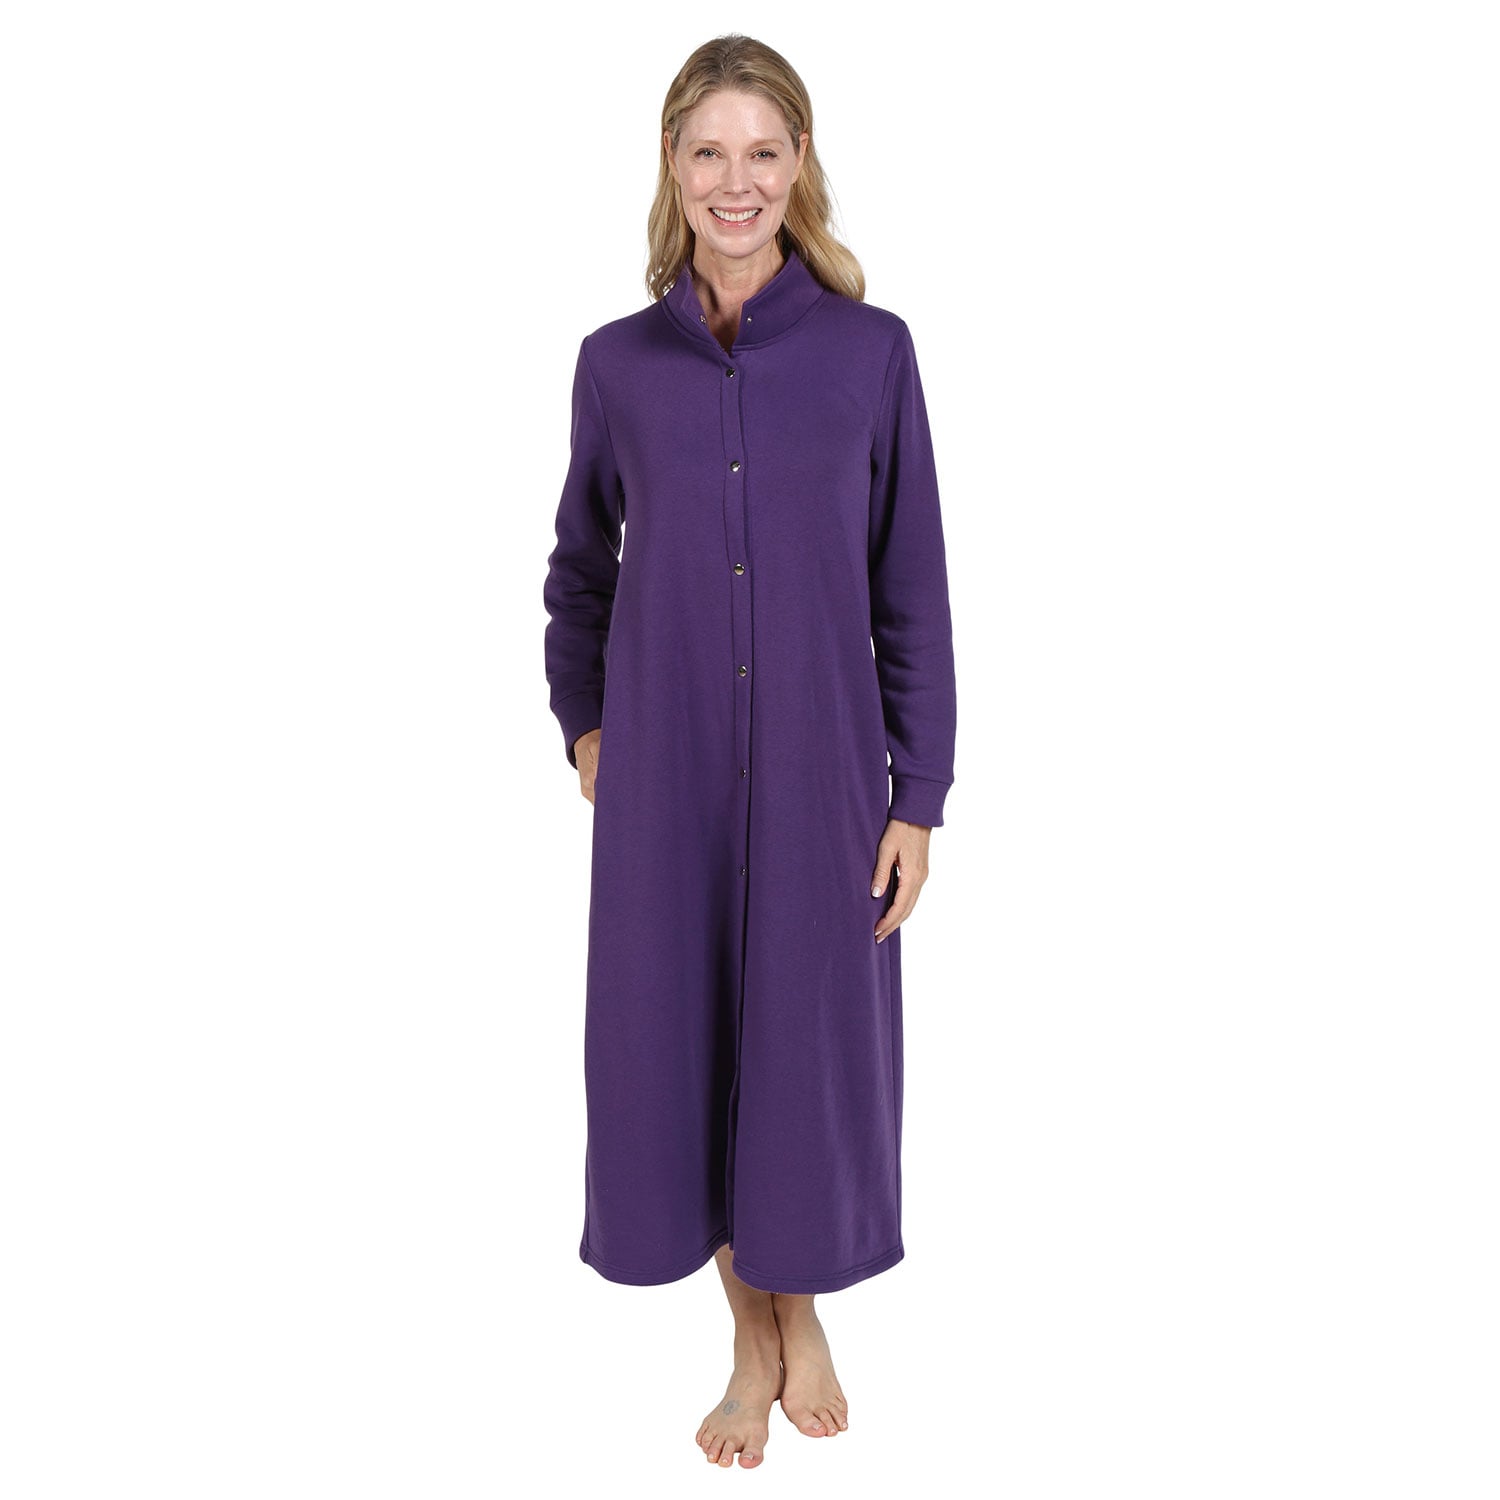 Housecoats for Women Snap Front - Fleece Long Sleeve Nightgown by ...